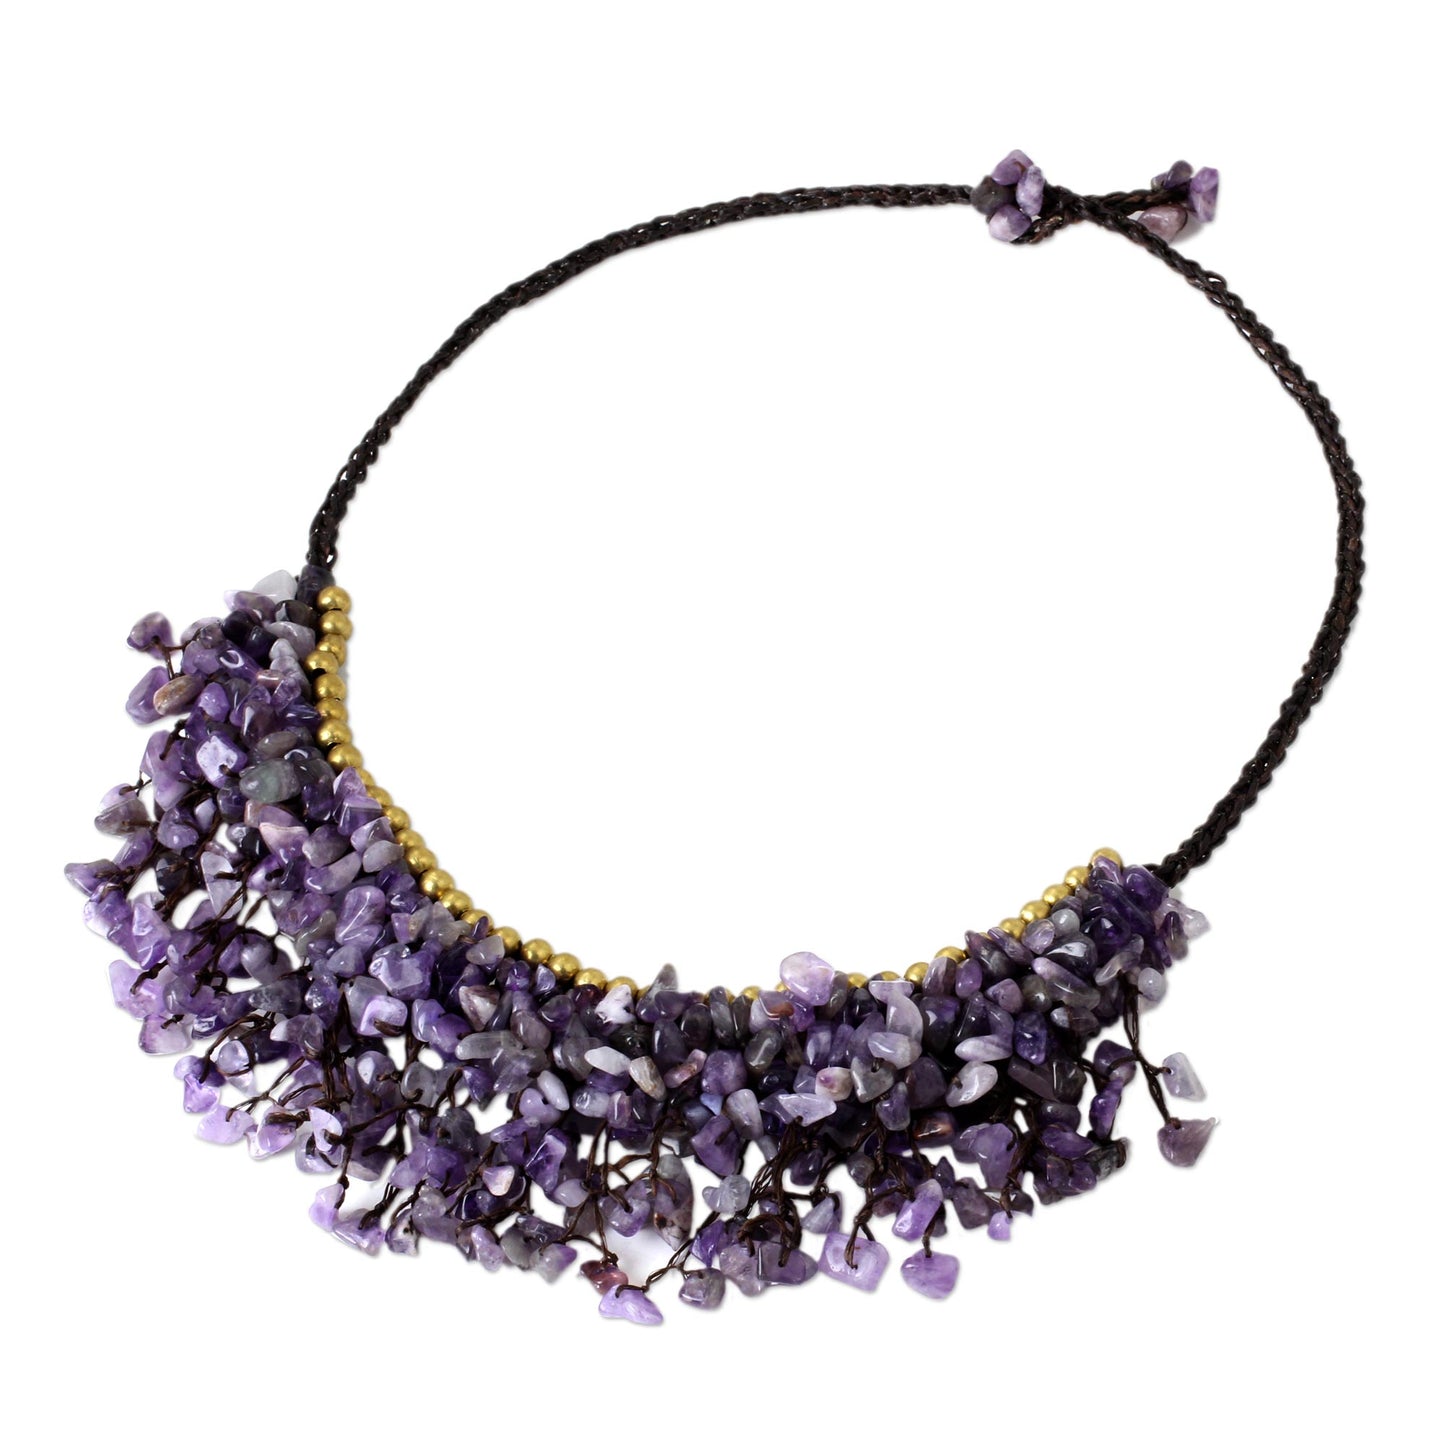 Dance Party Amethyst & Brass Beaded Necklace